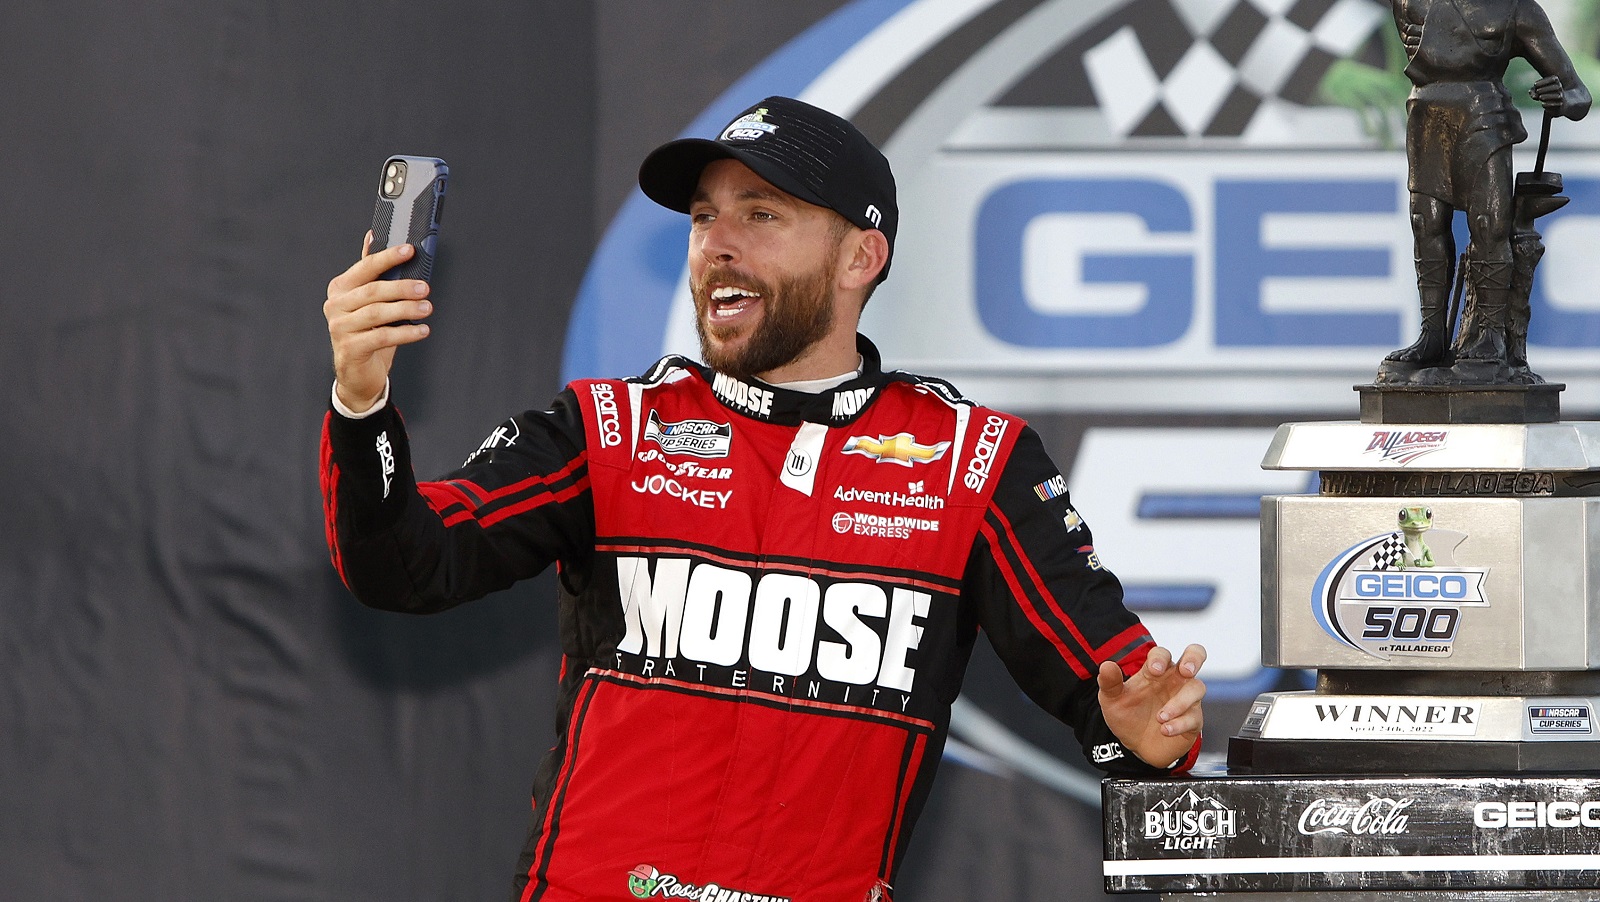 Ross Chastain, driver of the No. 1 Chevrolet, takes a selfie on Victory Lane after winning the NASCAR Cup Series GEICO 500 at Talladega Superspeedway on April 24, 2022.